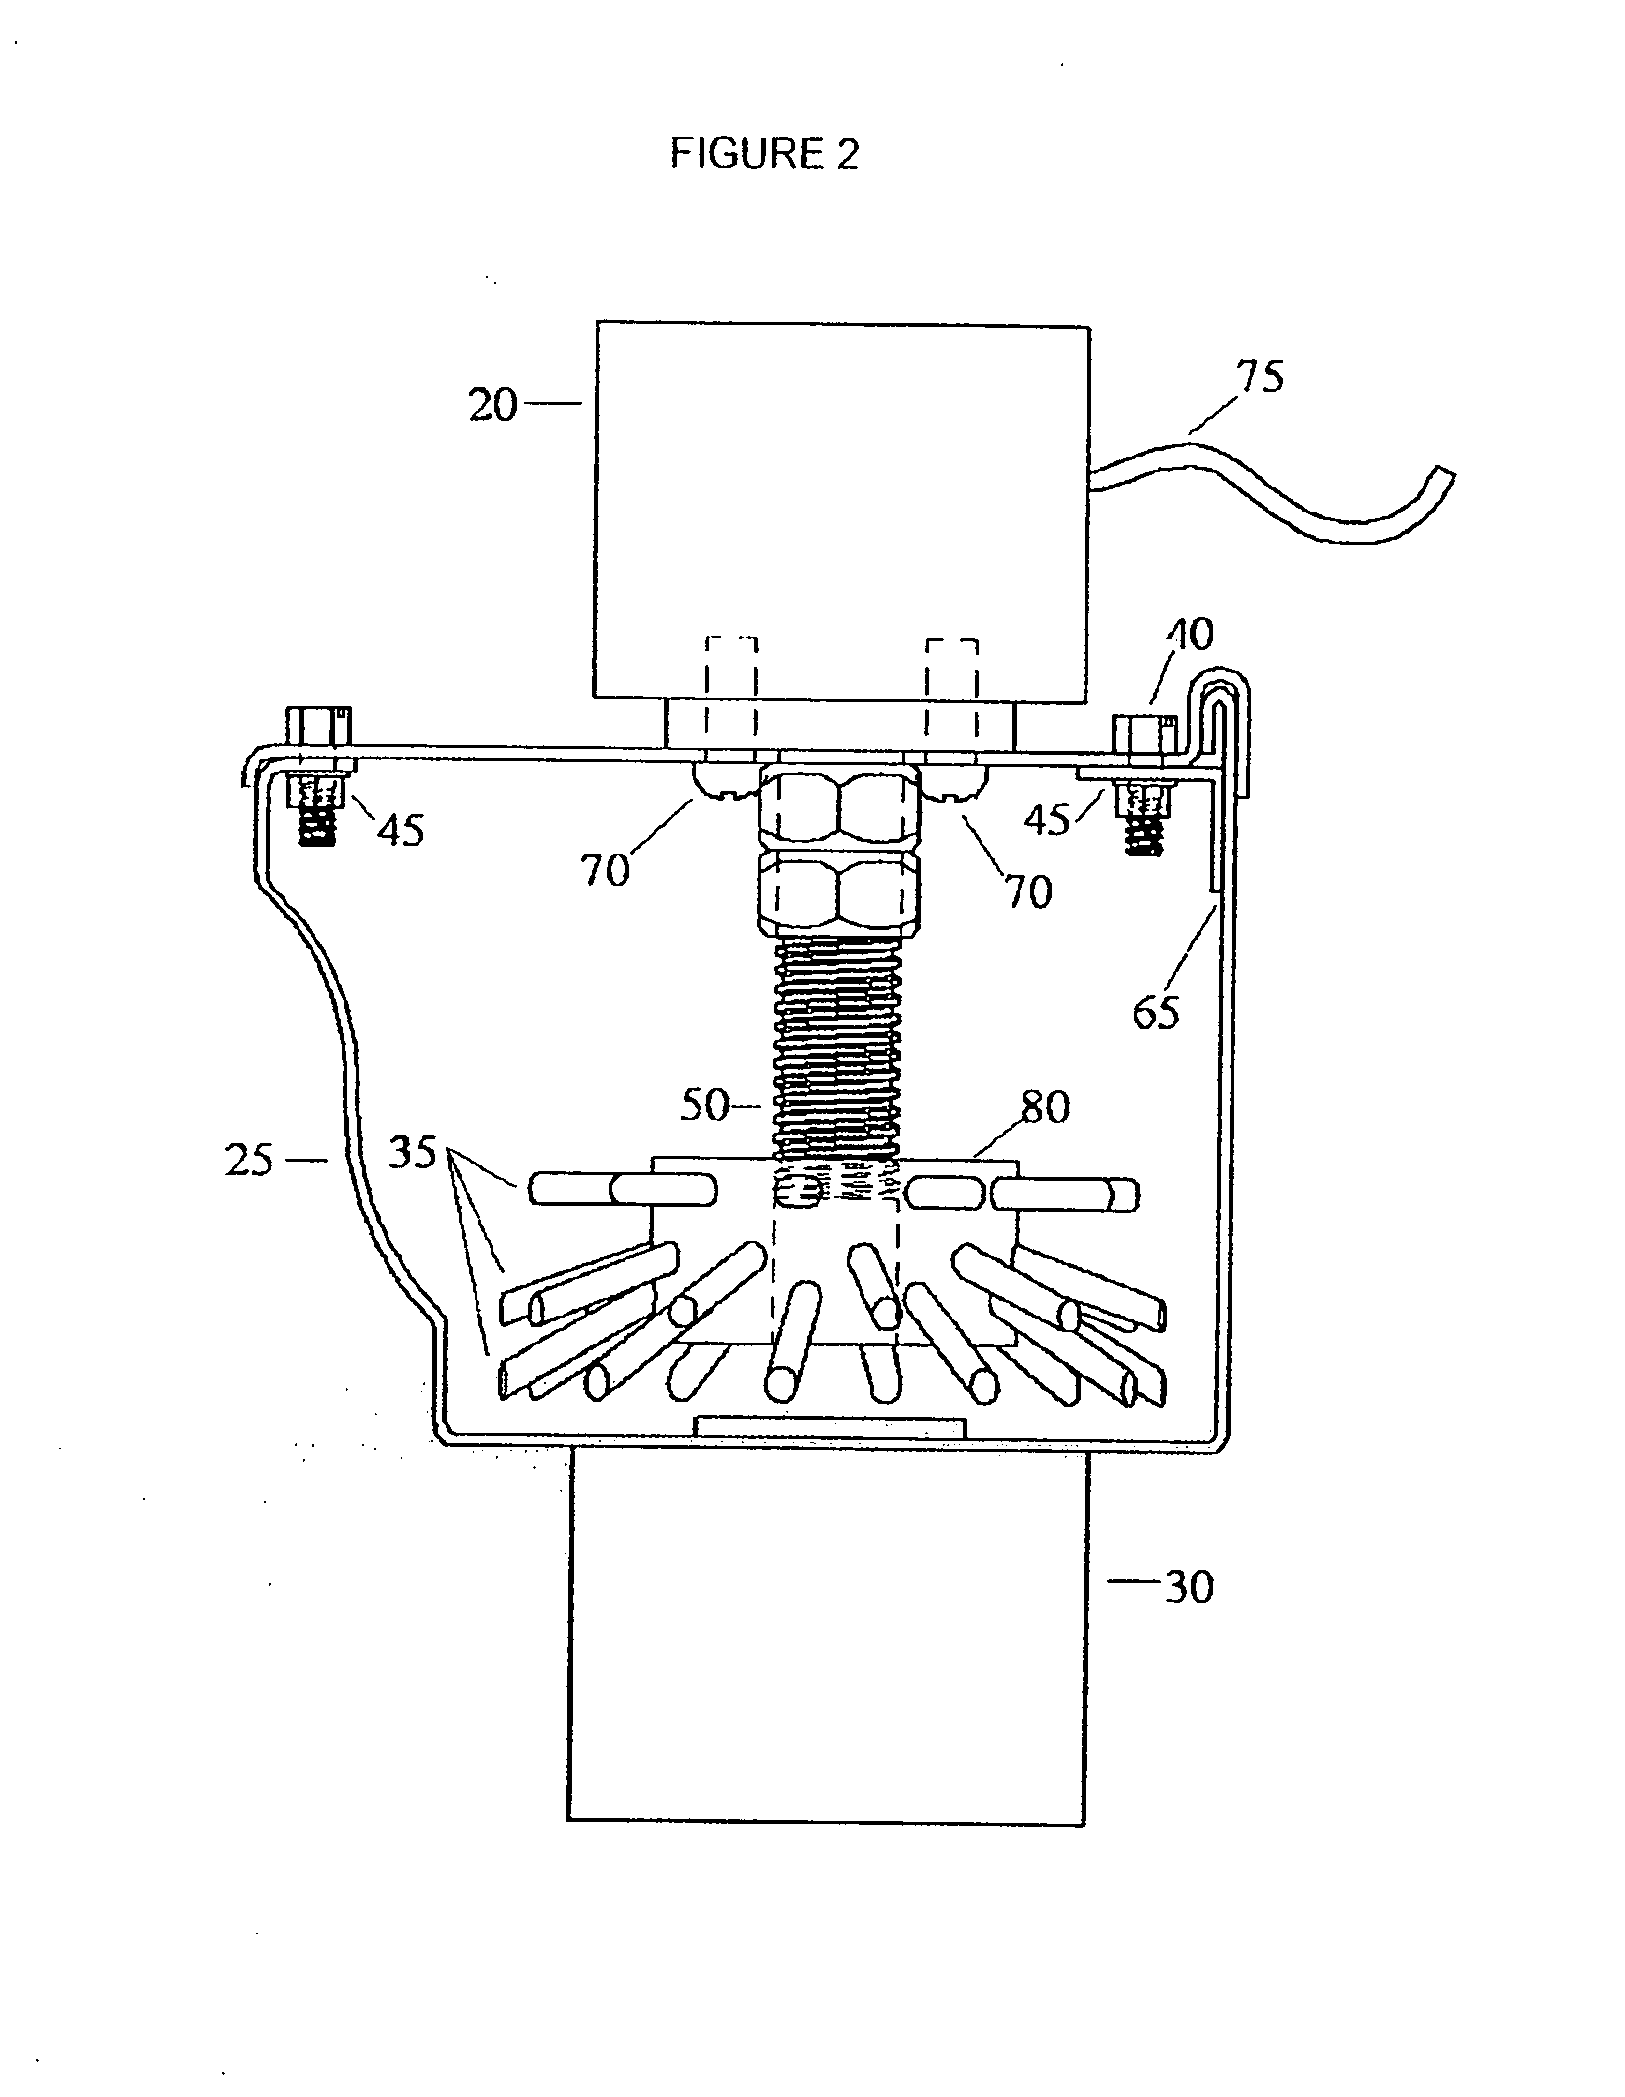 Method and apparatus for removal of gutter debris